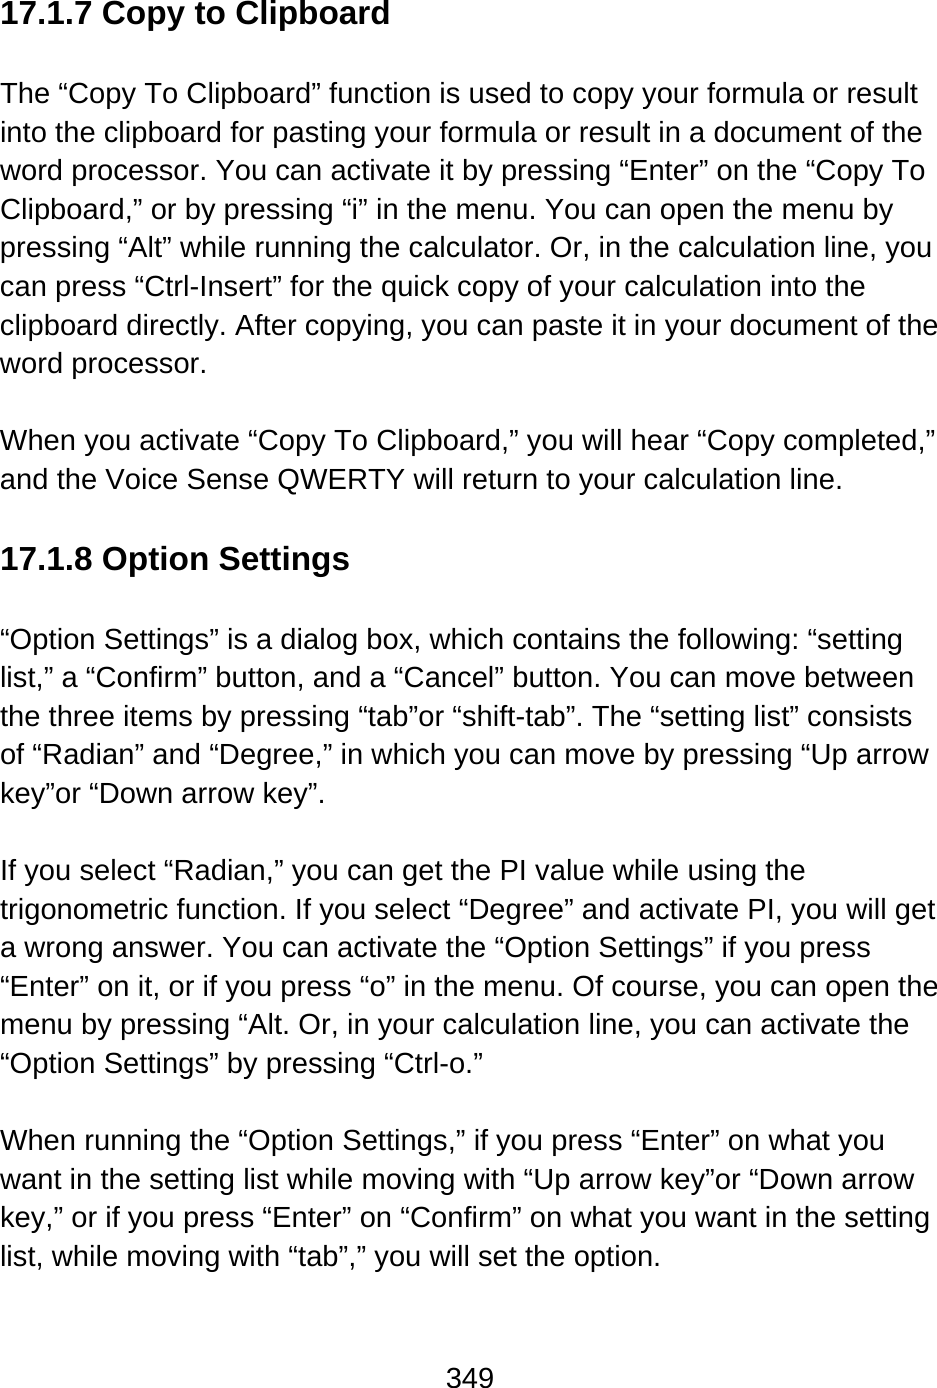 349   17.1.7 Copy to Clipboard  The “Copy To Clipboard” function is used to copy your formula or result into the clipboard for pasting your formula or result in a document of the word processor. You can activate it by pressing “Enter” on the “Copy To Clipboard,” or by pressing “i” in the menu. You can open the menu by pressing “Alt” while running the calculator. Or, in the calculation line, you can press “Ctrl-Insert” for the quick copy of your calculation into the clipboard directly. After copying, you can paste it in your document of the word processor.  When you activate “Copy To Clipboard,” you will hear “Copy completed,” and the Voice Sense QWERTY will return to your calculation line.    17.1.8 Option Settings  “Option Settings” is a dialog box, which contains the following: “setting list,” a “Confirm” button, and a “Cancel” button. You can move between the three items by pressing “tab”or “shift-tab”. The “setting list” consists of “Radian” and “Degree,” in which you can move by pressing “Up arrow key”or “Down arrow key”.  If you select “Radian,” you can get the PI value while using the trigonometric function. If you select “Degree” and activate PI, you will get a wrong answer. You can activate the “Option Settings” if you press “Enter” on it, or if you press “o” in the menu. Of course, you can open the menu by pressing “Alt. Or, in your calculation line, you can activate the “Option Settings” by pressing “Ctrl-o.”  When running the “Option Settings,” if you press “Enter” on what you want in the setting list while moving with “Up arrow key”or “Down arrow key,” or if you press “Enter” on “Confirm” on what you want in the setting list, while moving with “tab”,” you will set the option.  